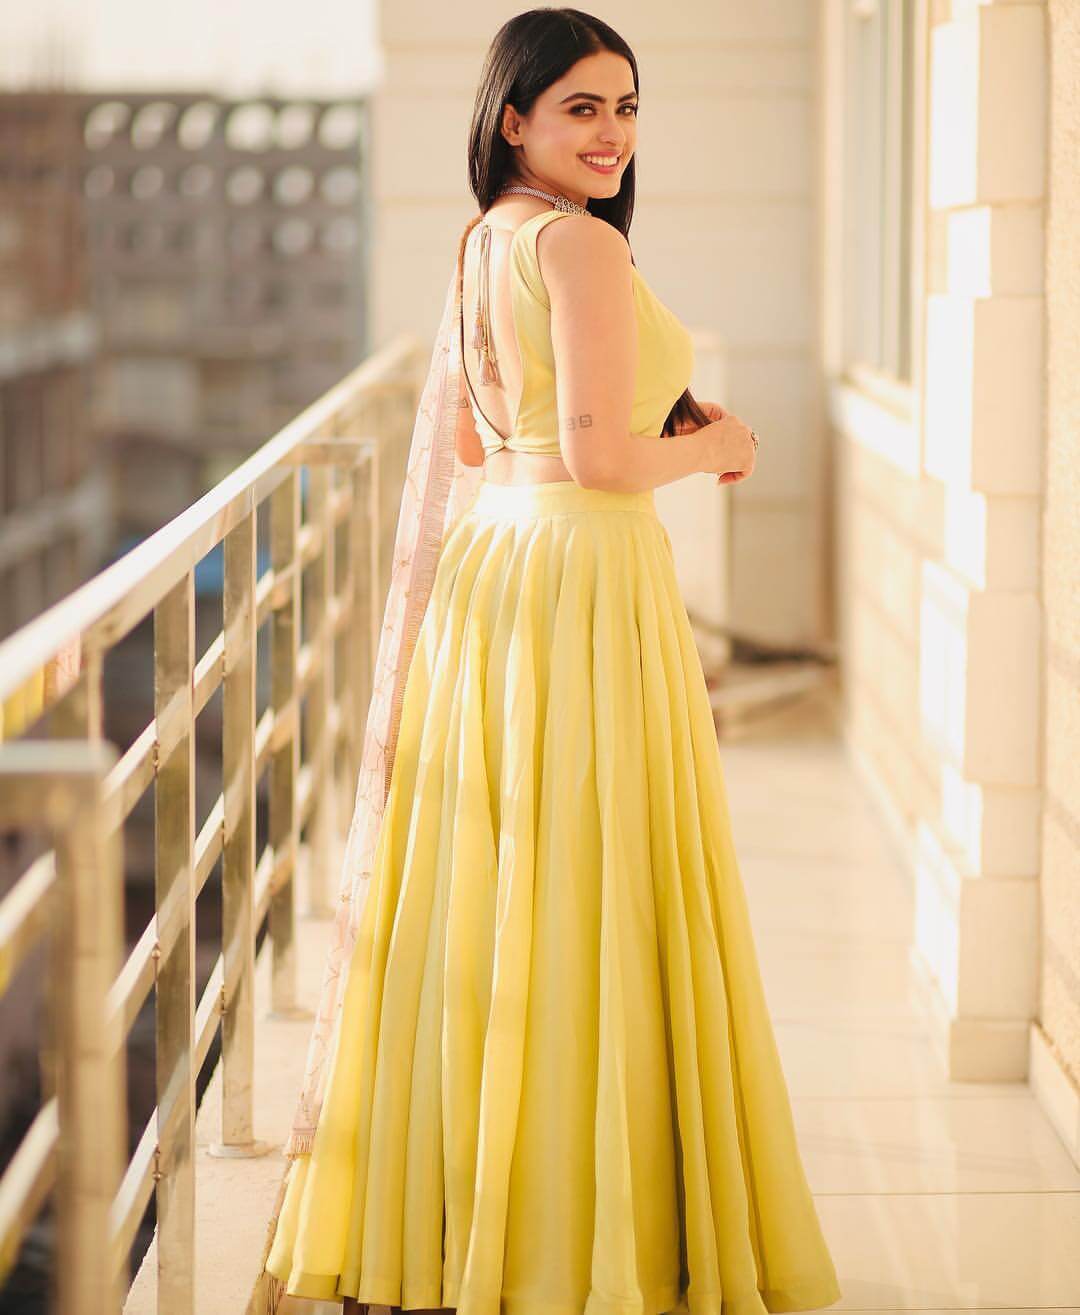 Simi Chahal Look Classy In Yellow Lehenga Outfit Simi Chahal Outfit &amp; Looks Inspo